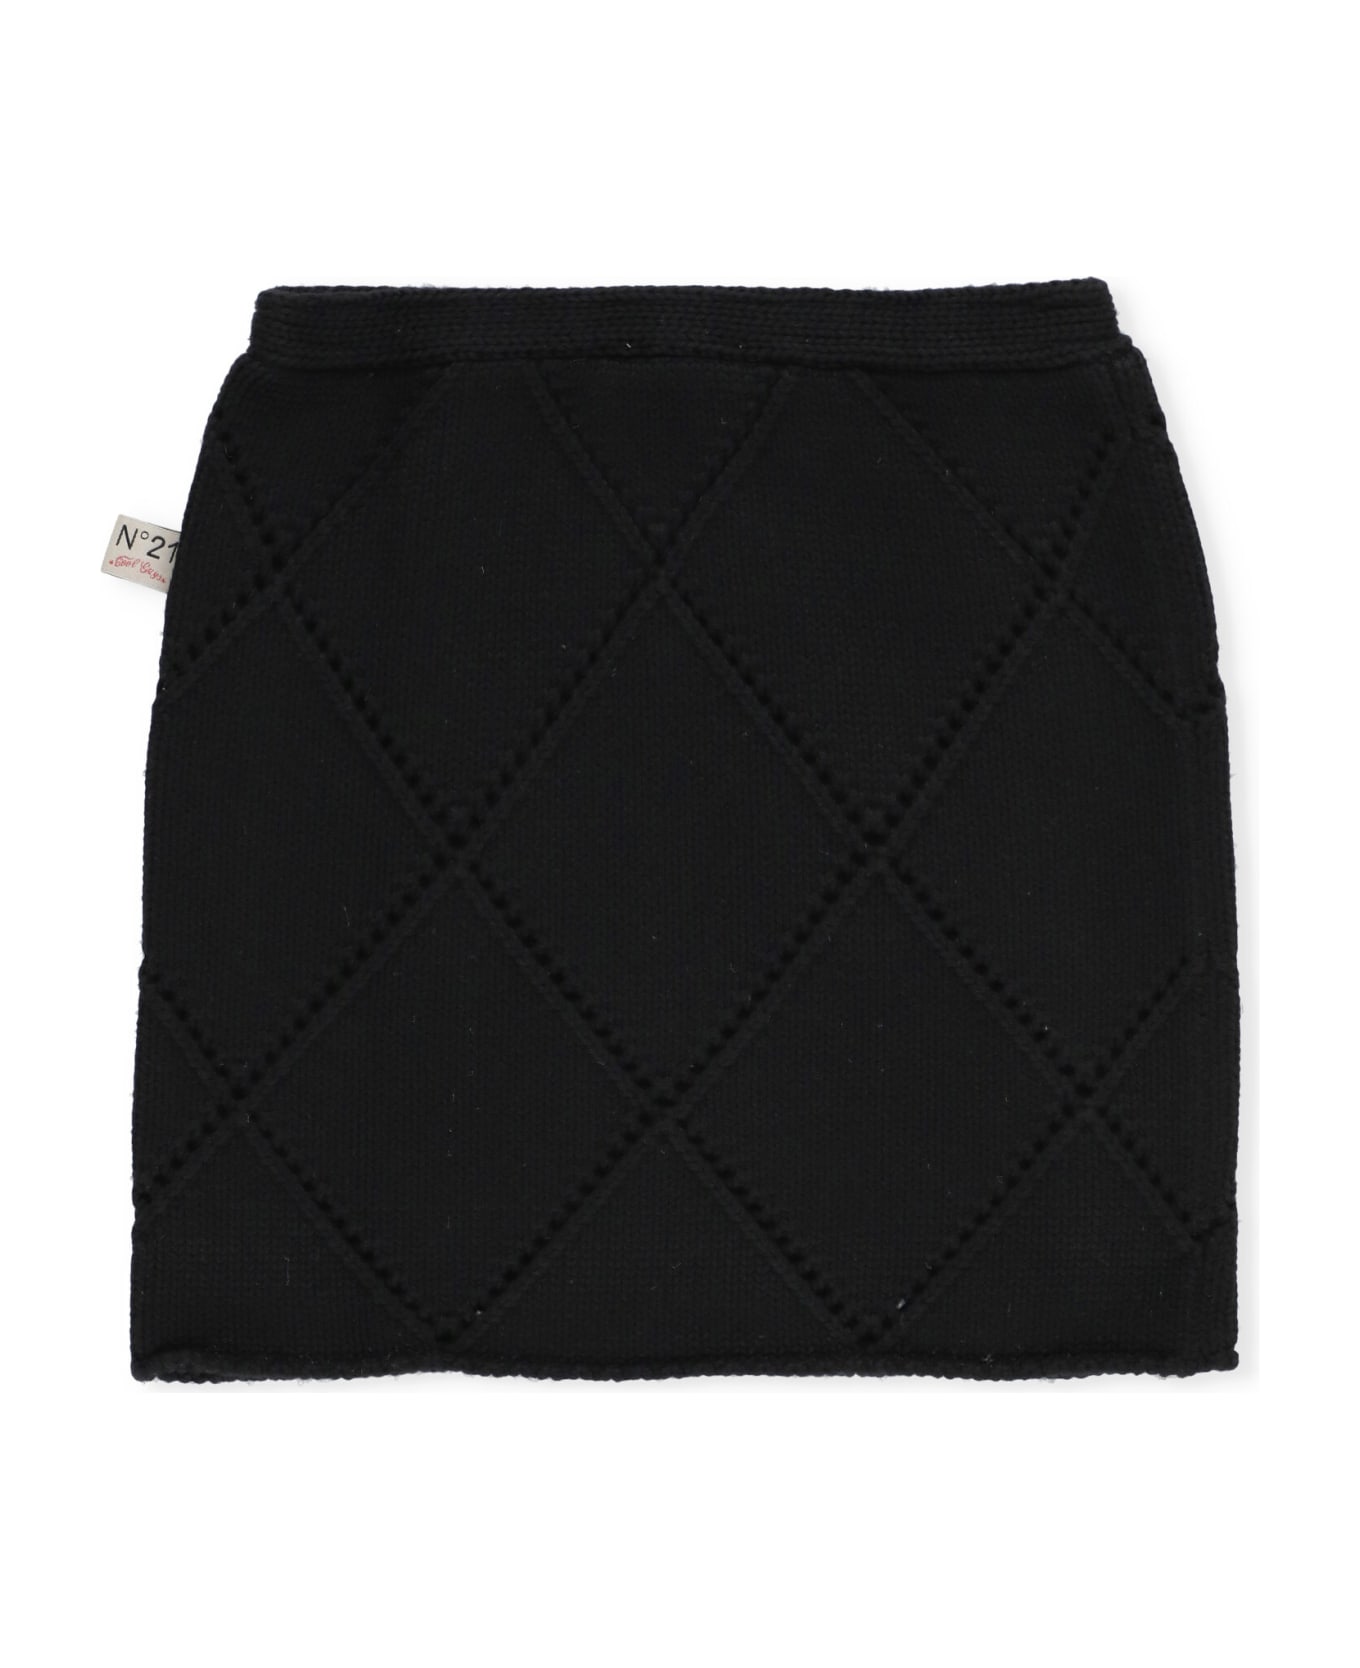 N.21 Wool And Cotton Skirt - Black